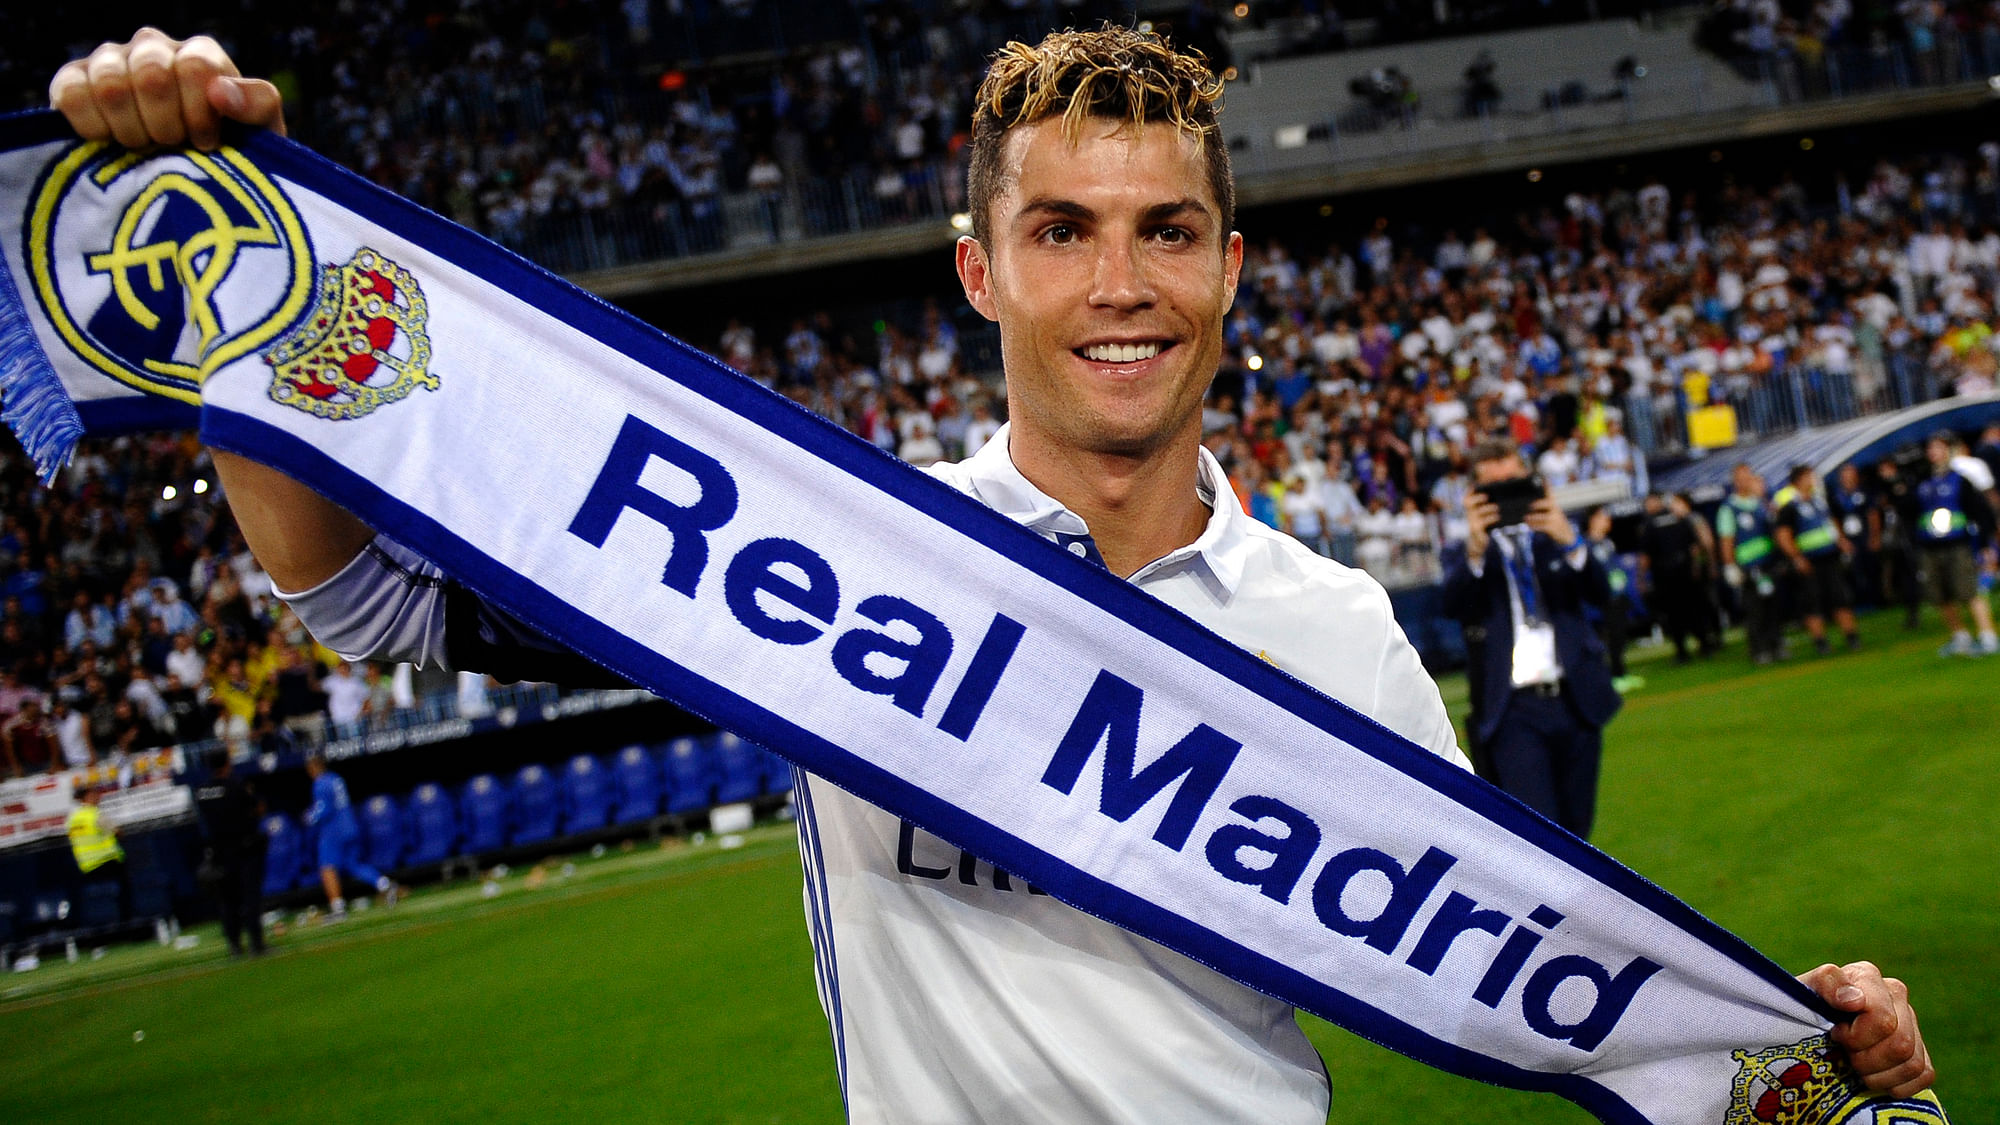 After 9 seasons at Real Madrid, Cristiano Ronaldo has announced his decision to leave the club and join Juventus.